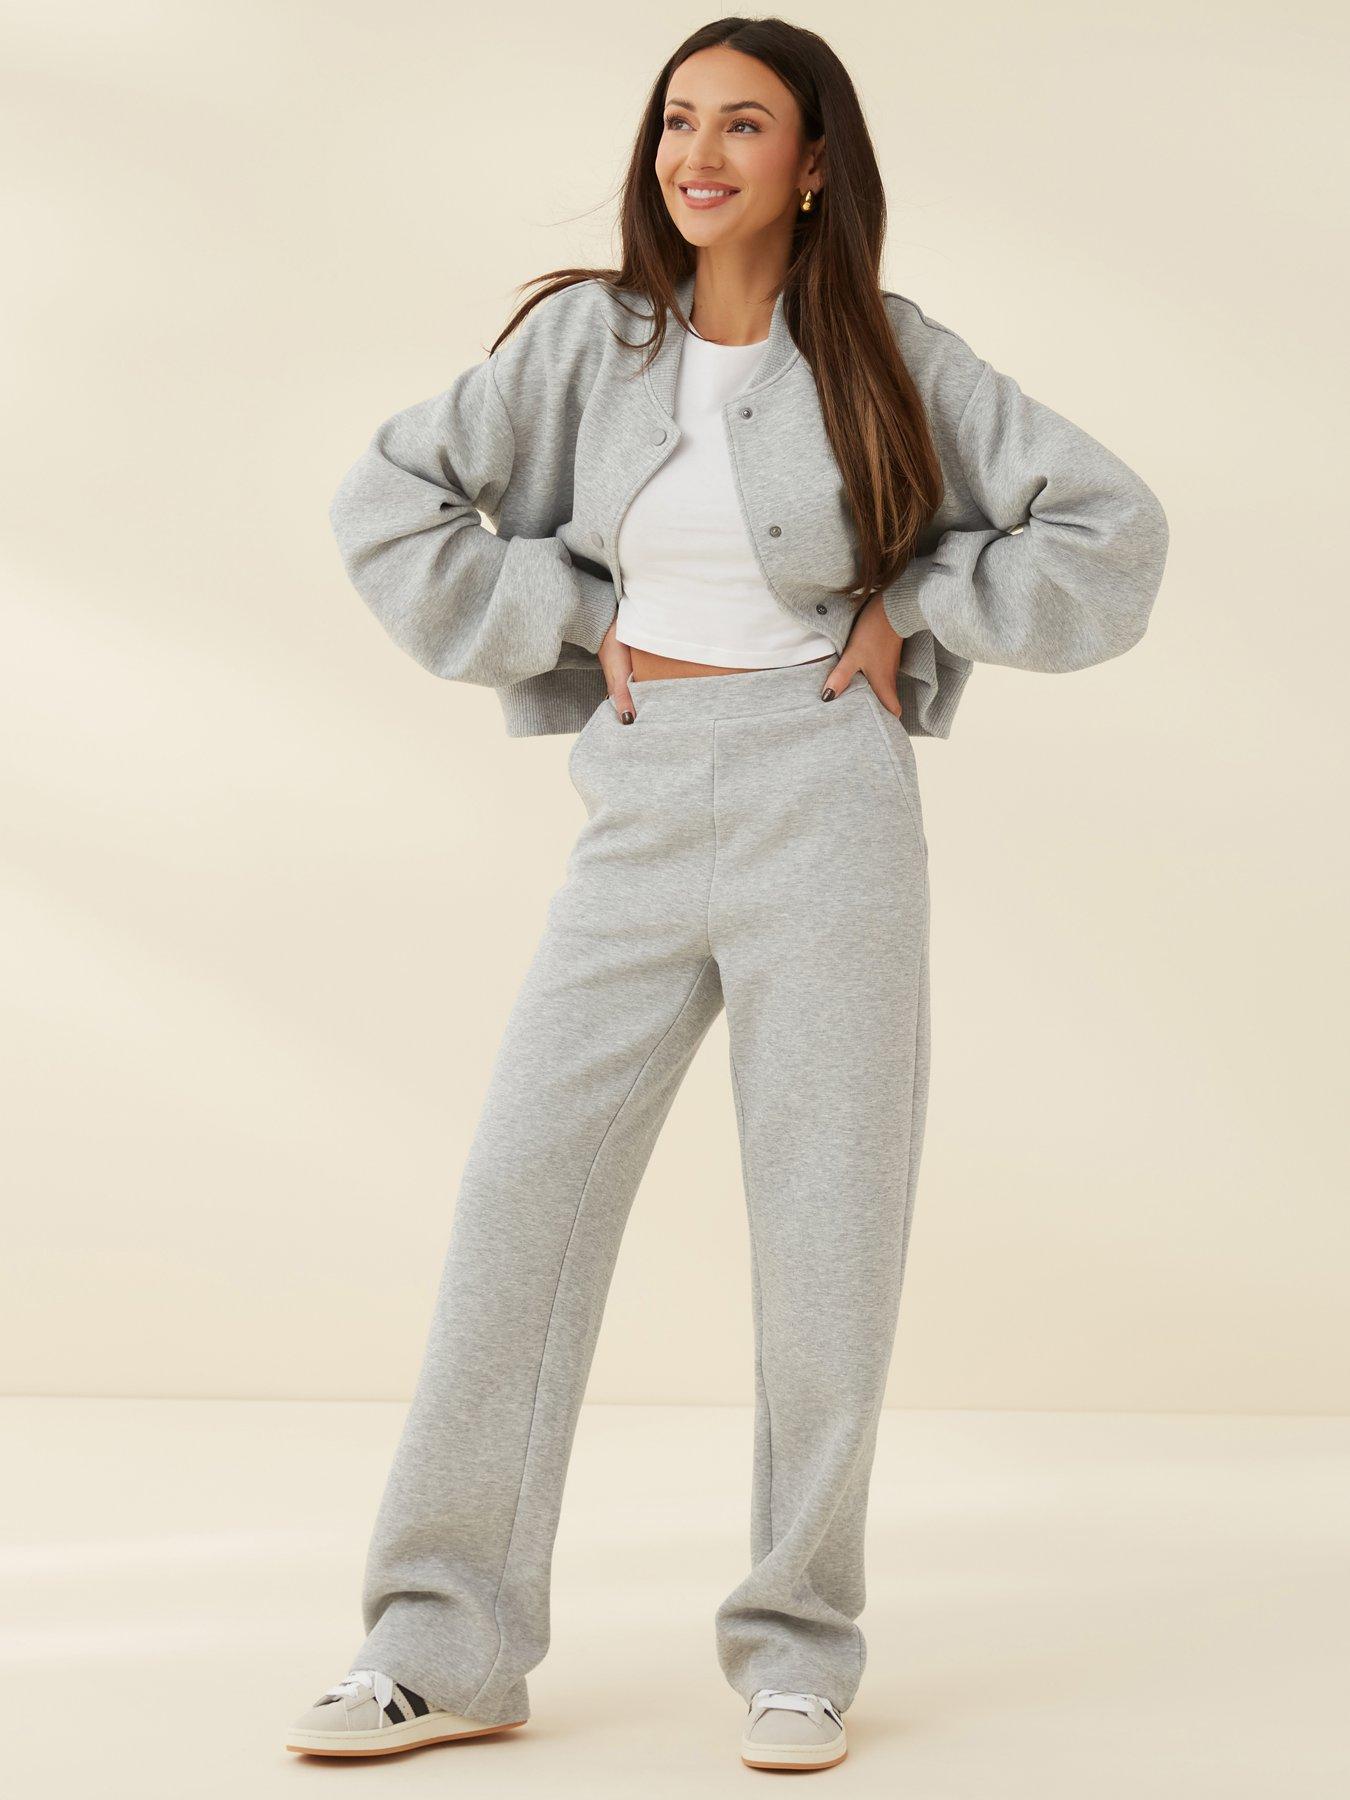 BELTED PLEATED PANTS - Gray marl